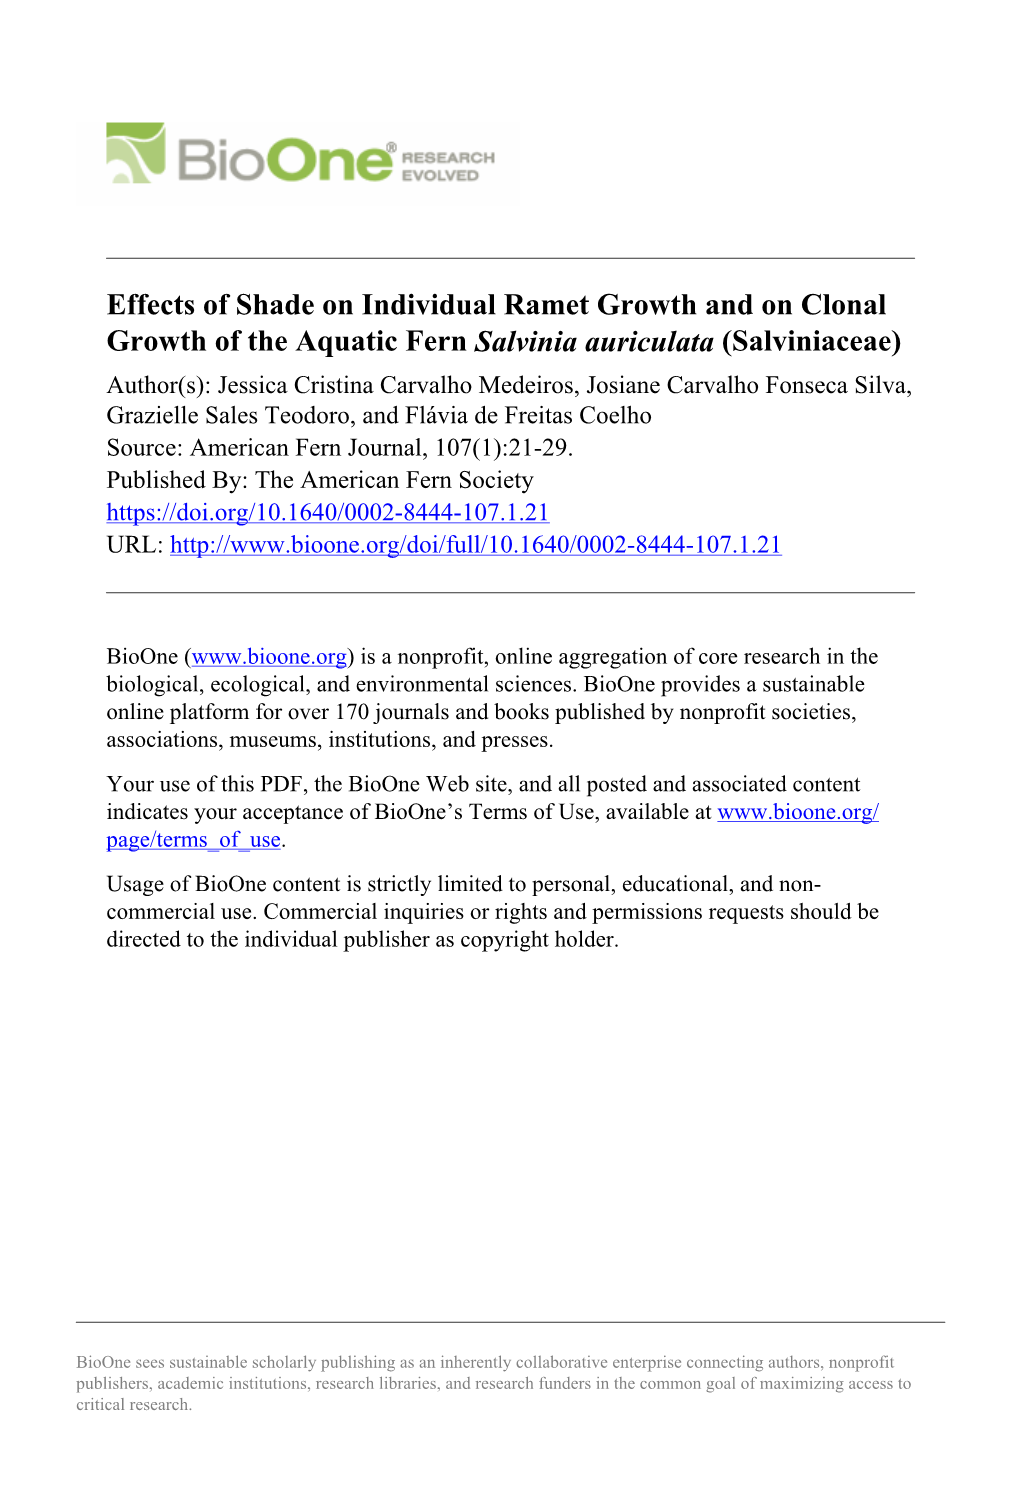 Effects of Shade on Individual Ramet Growth and on Clonal Growth of The